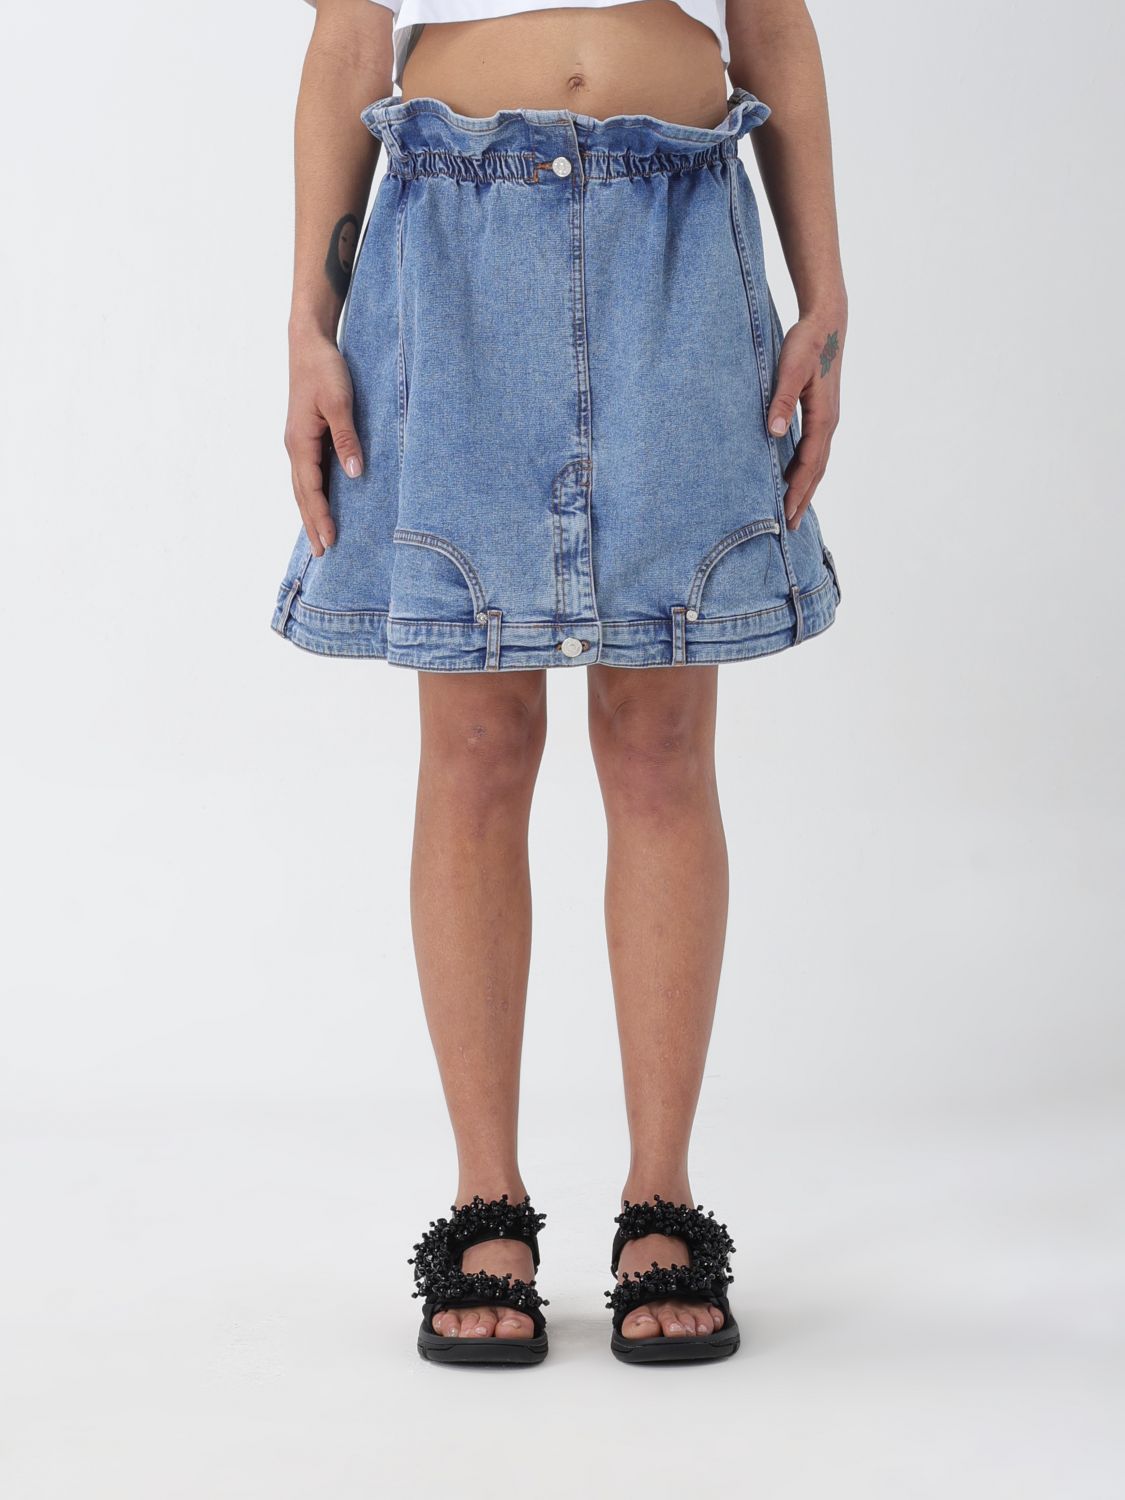 Moschino Jeans Skirt MOSCHINO JEANS Woman colour Denim